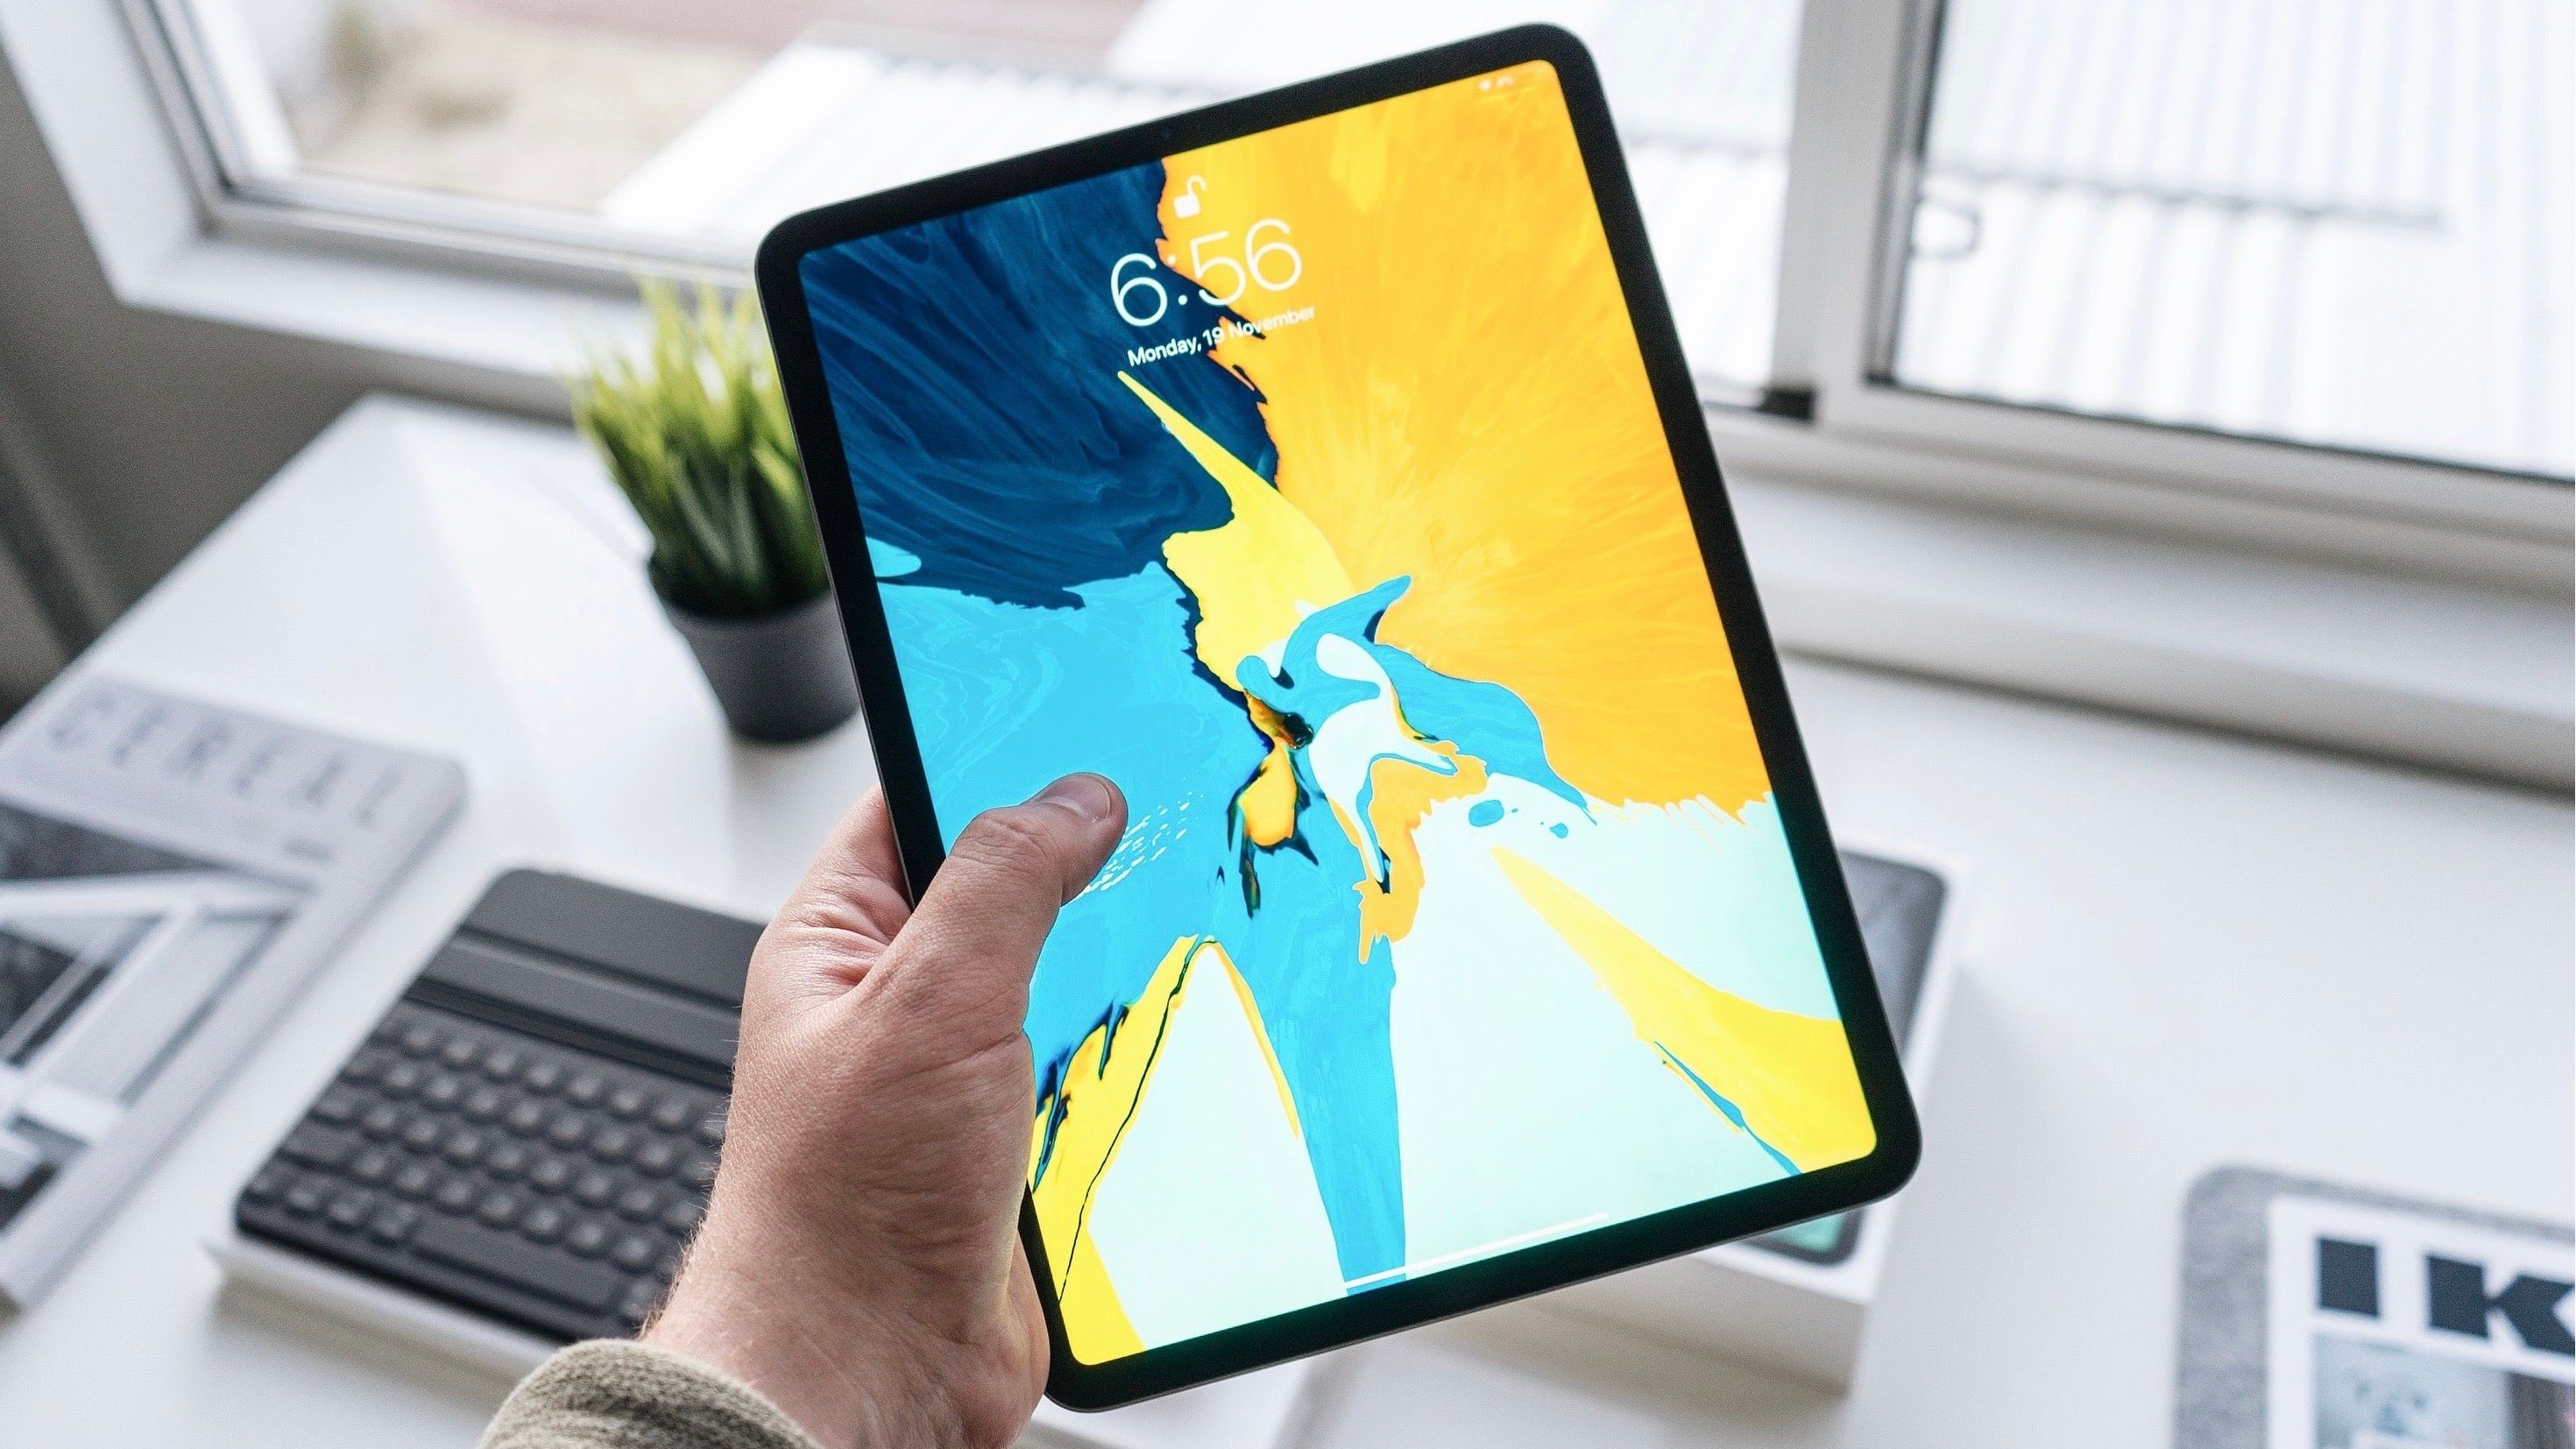 Holding an iPad Pro with bright wallpaper